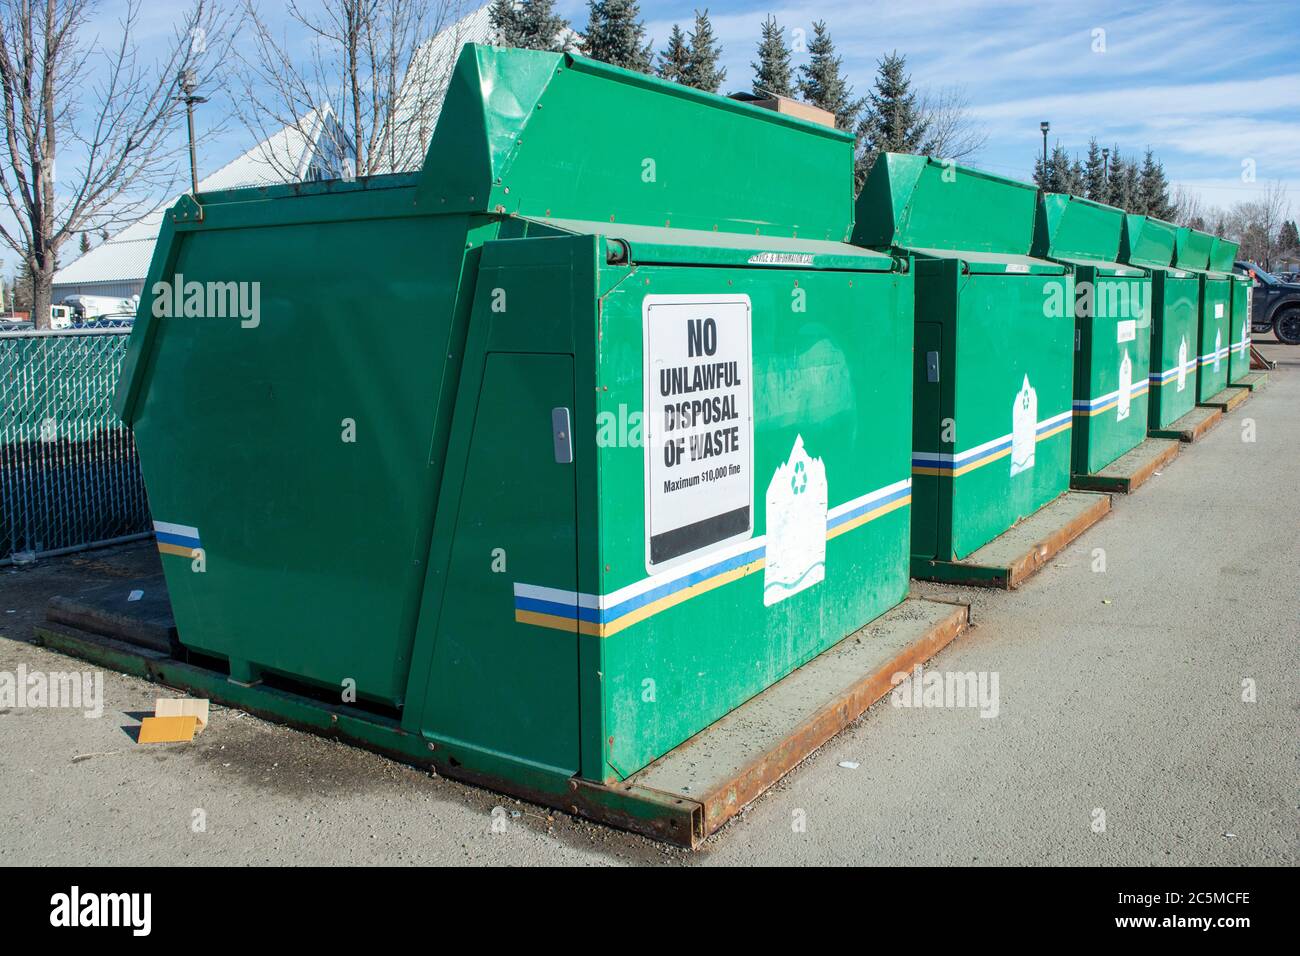 Large Community Recycling Bins - Containers in Park Lot Stock Photo